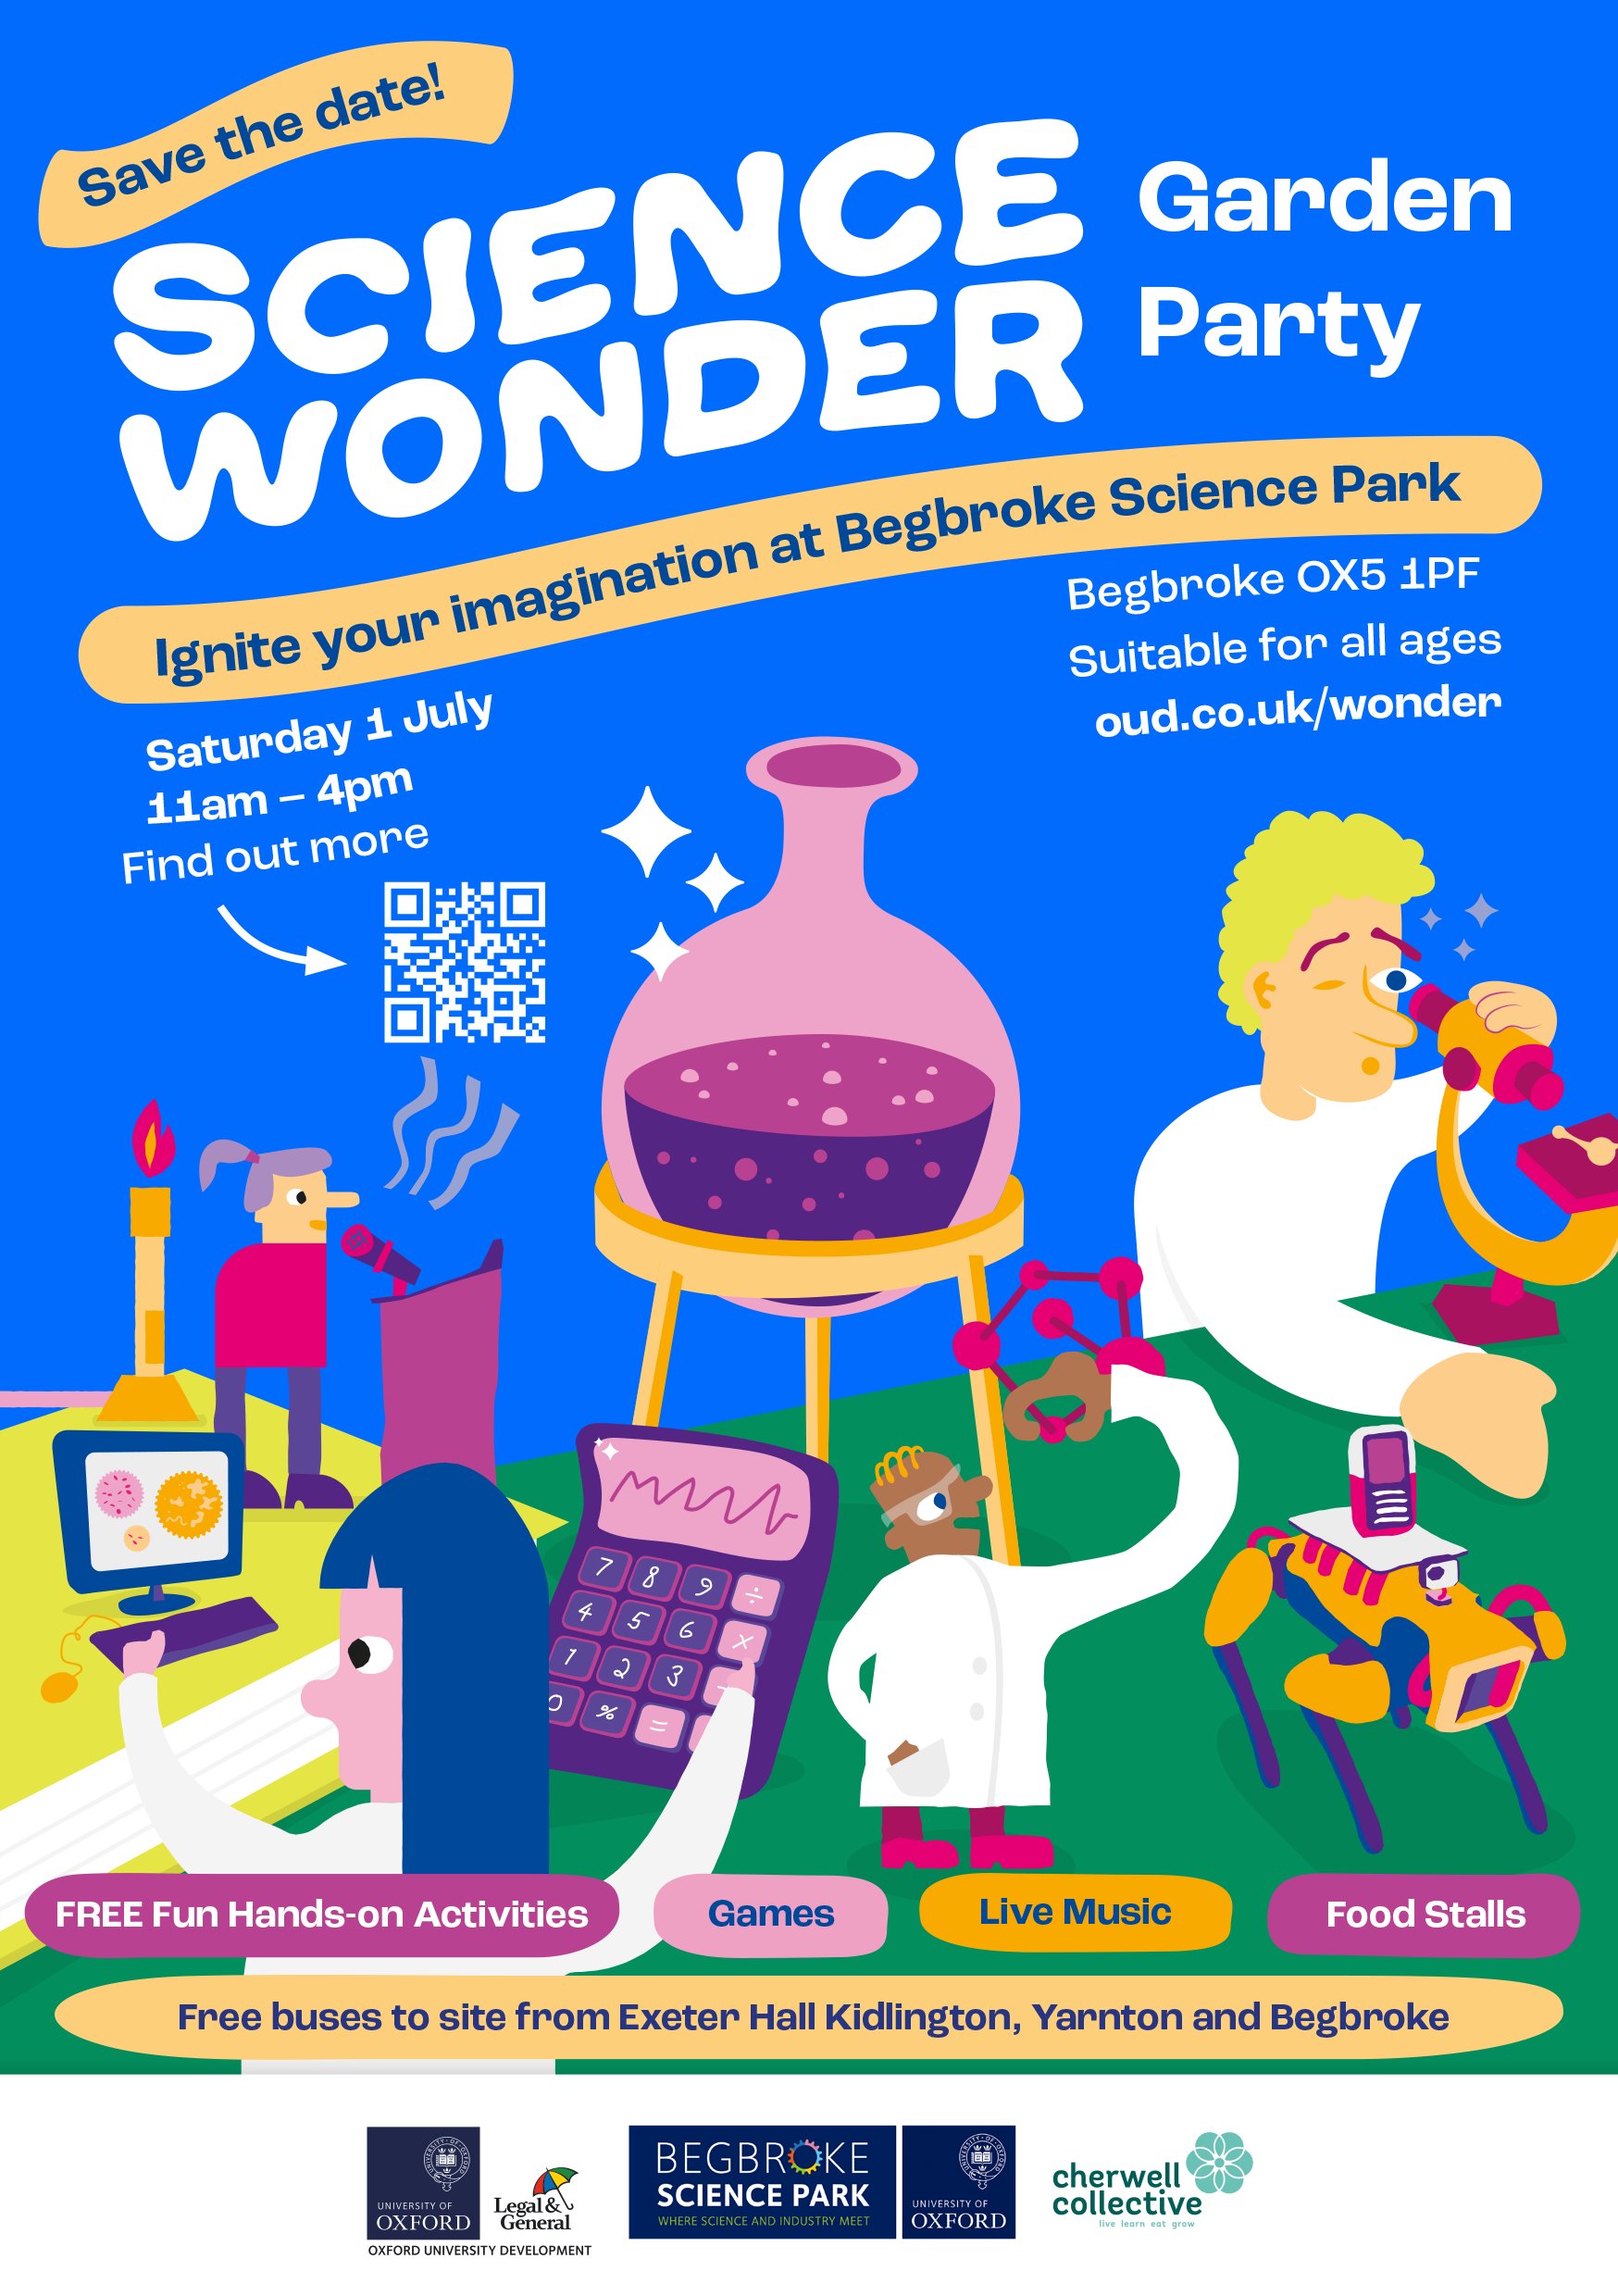 Poster advertising the Science Wonder Garden Party on 1 July at Begbroke Science Park.